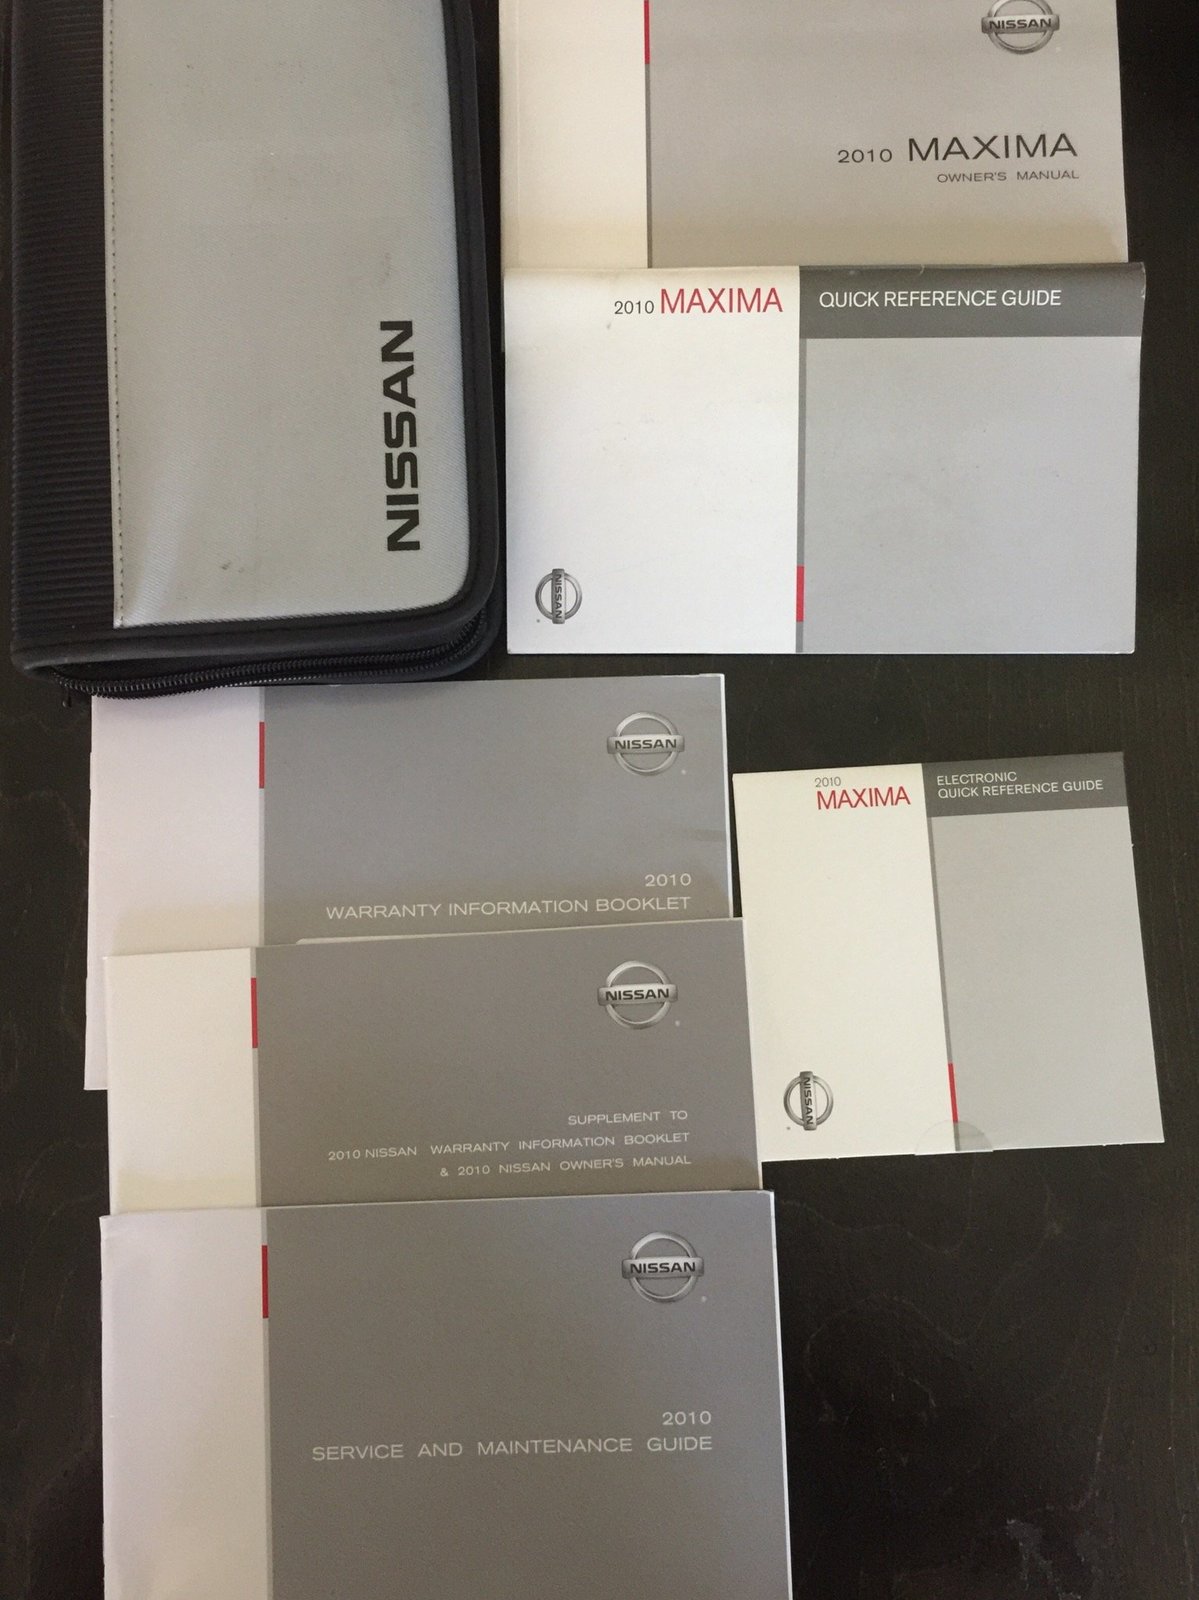 Primary image for 2010 Nissan Maxima Owners Manual [Paperback] Nissan